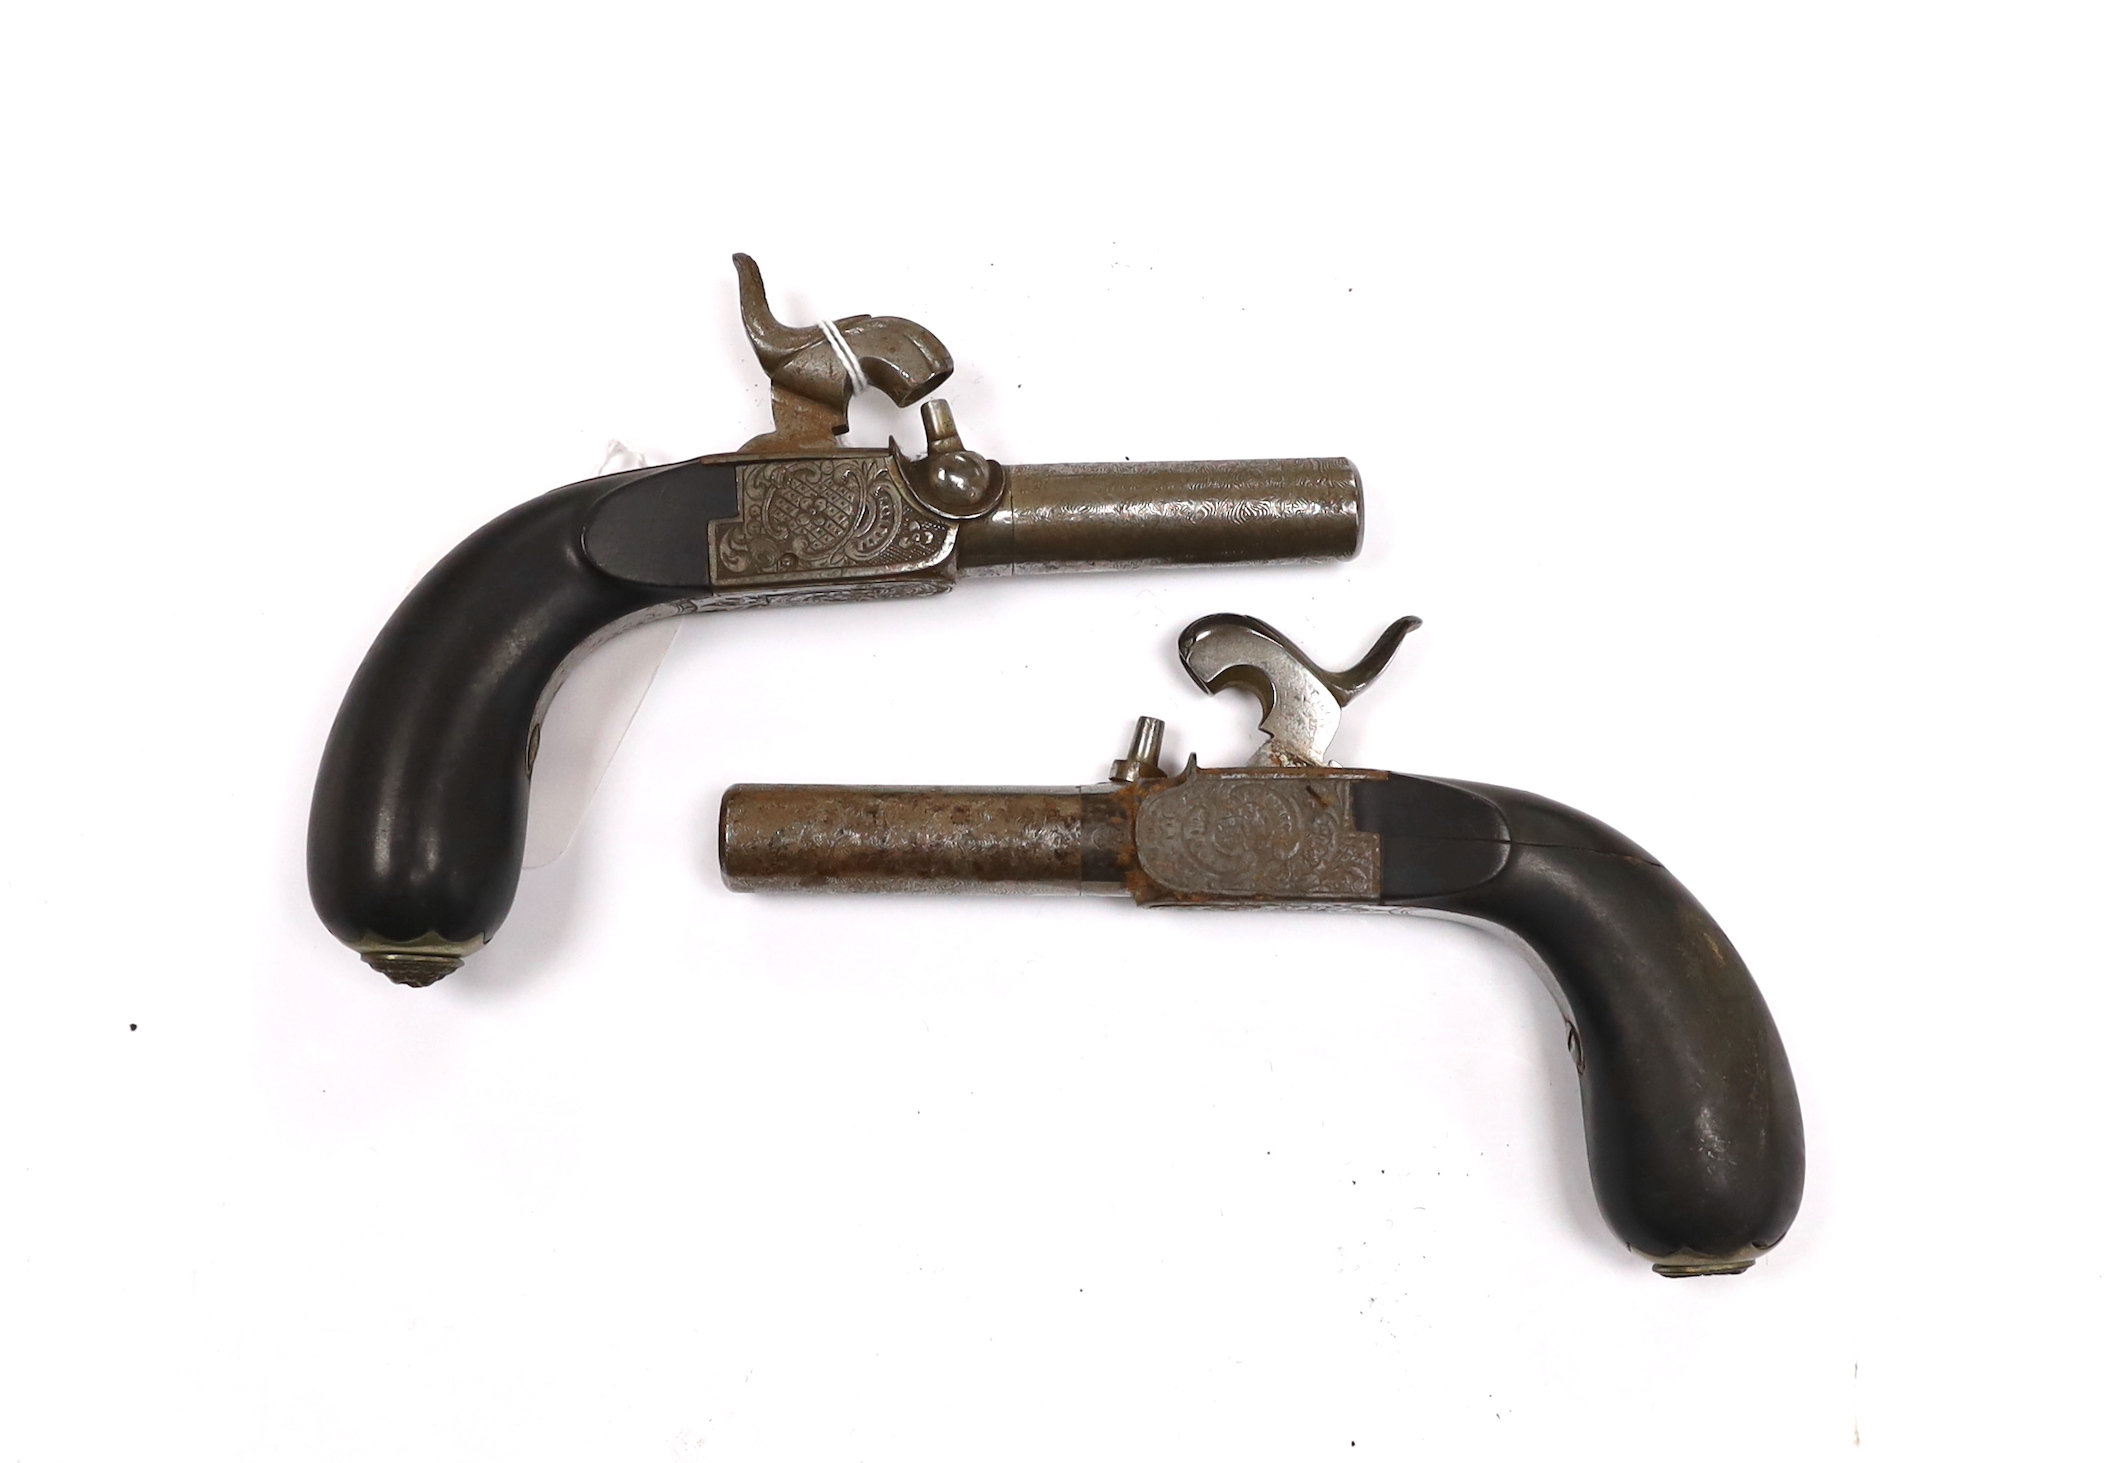 A pair of 19th century box lock, percussion pistols, with turn off Damascus twist barrels, engraved frames, folding triggers, and rounded ebony grips fitted with hinged butt cap lids, barrels 4.8cm